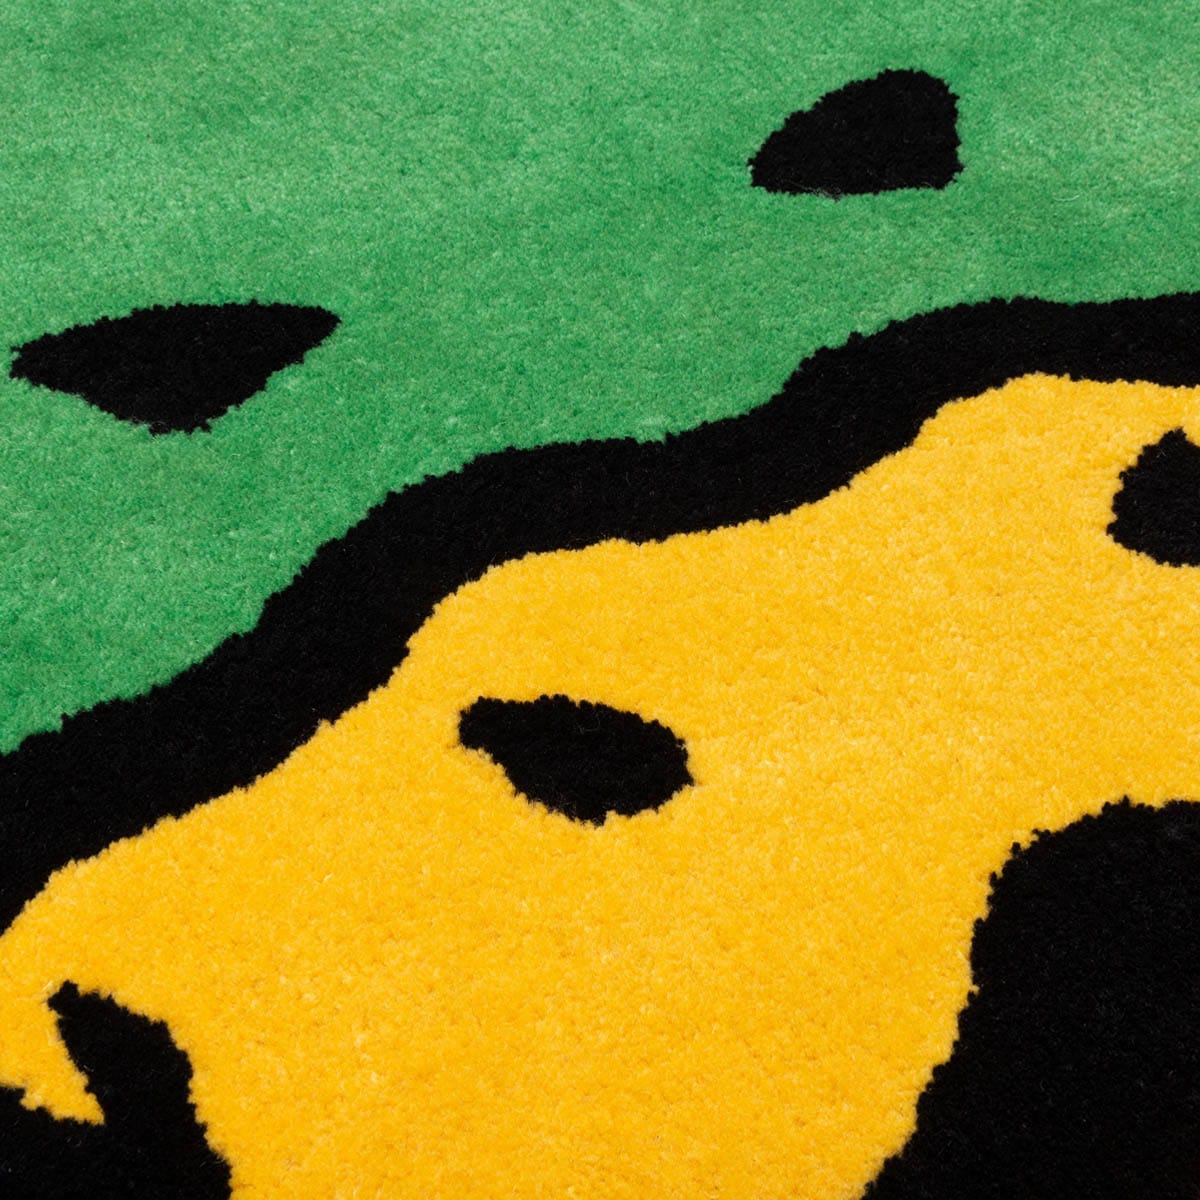 Human Made - Duck Face Rug (Large)